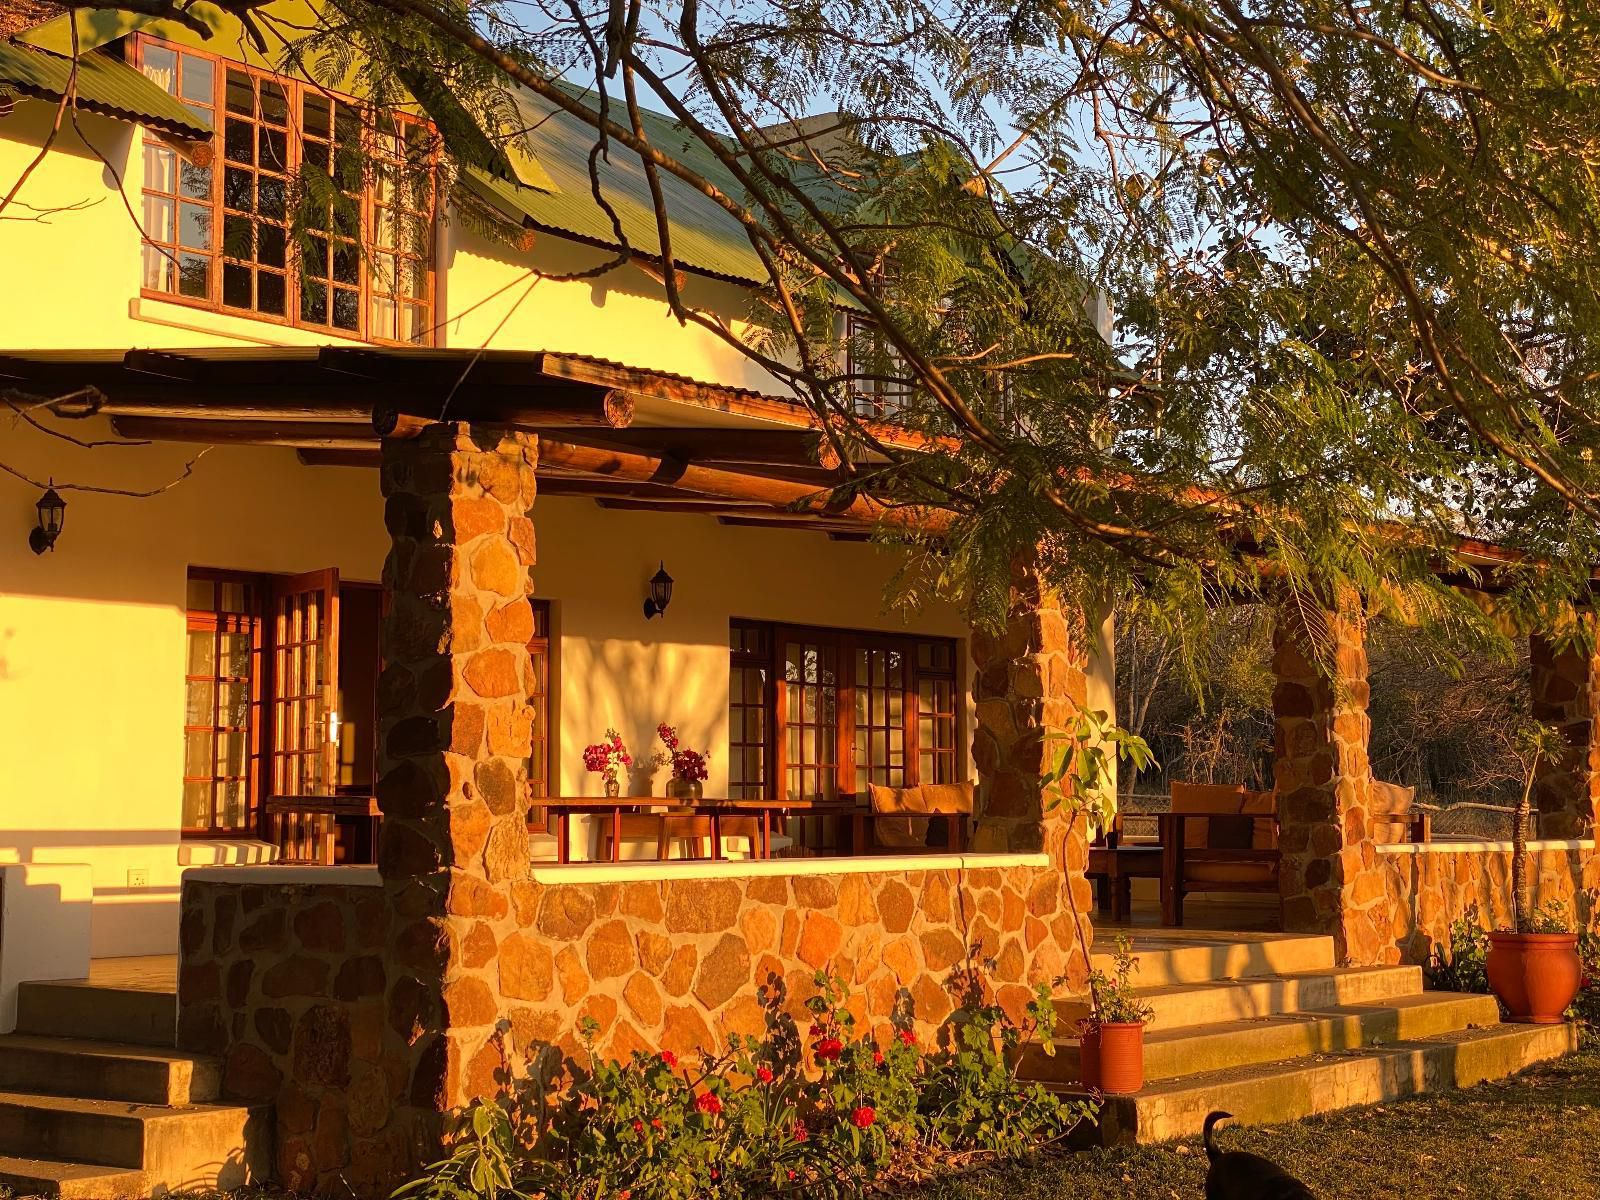 Waterberg Cottages Vaalwater Limpopo Province South Africa Colorful, House, Building, Architecture